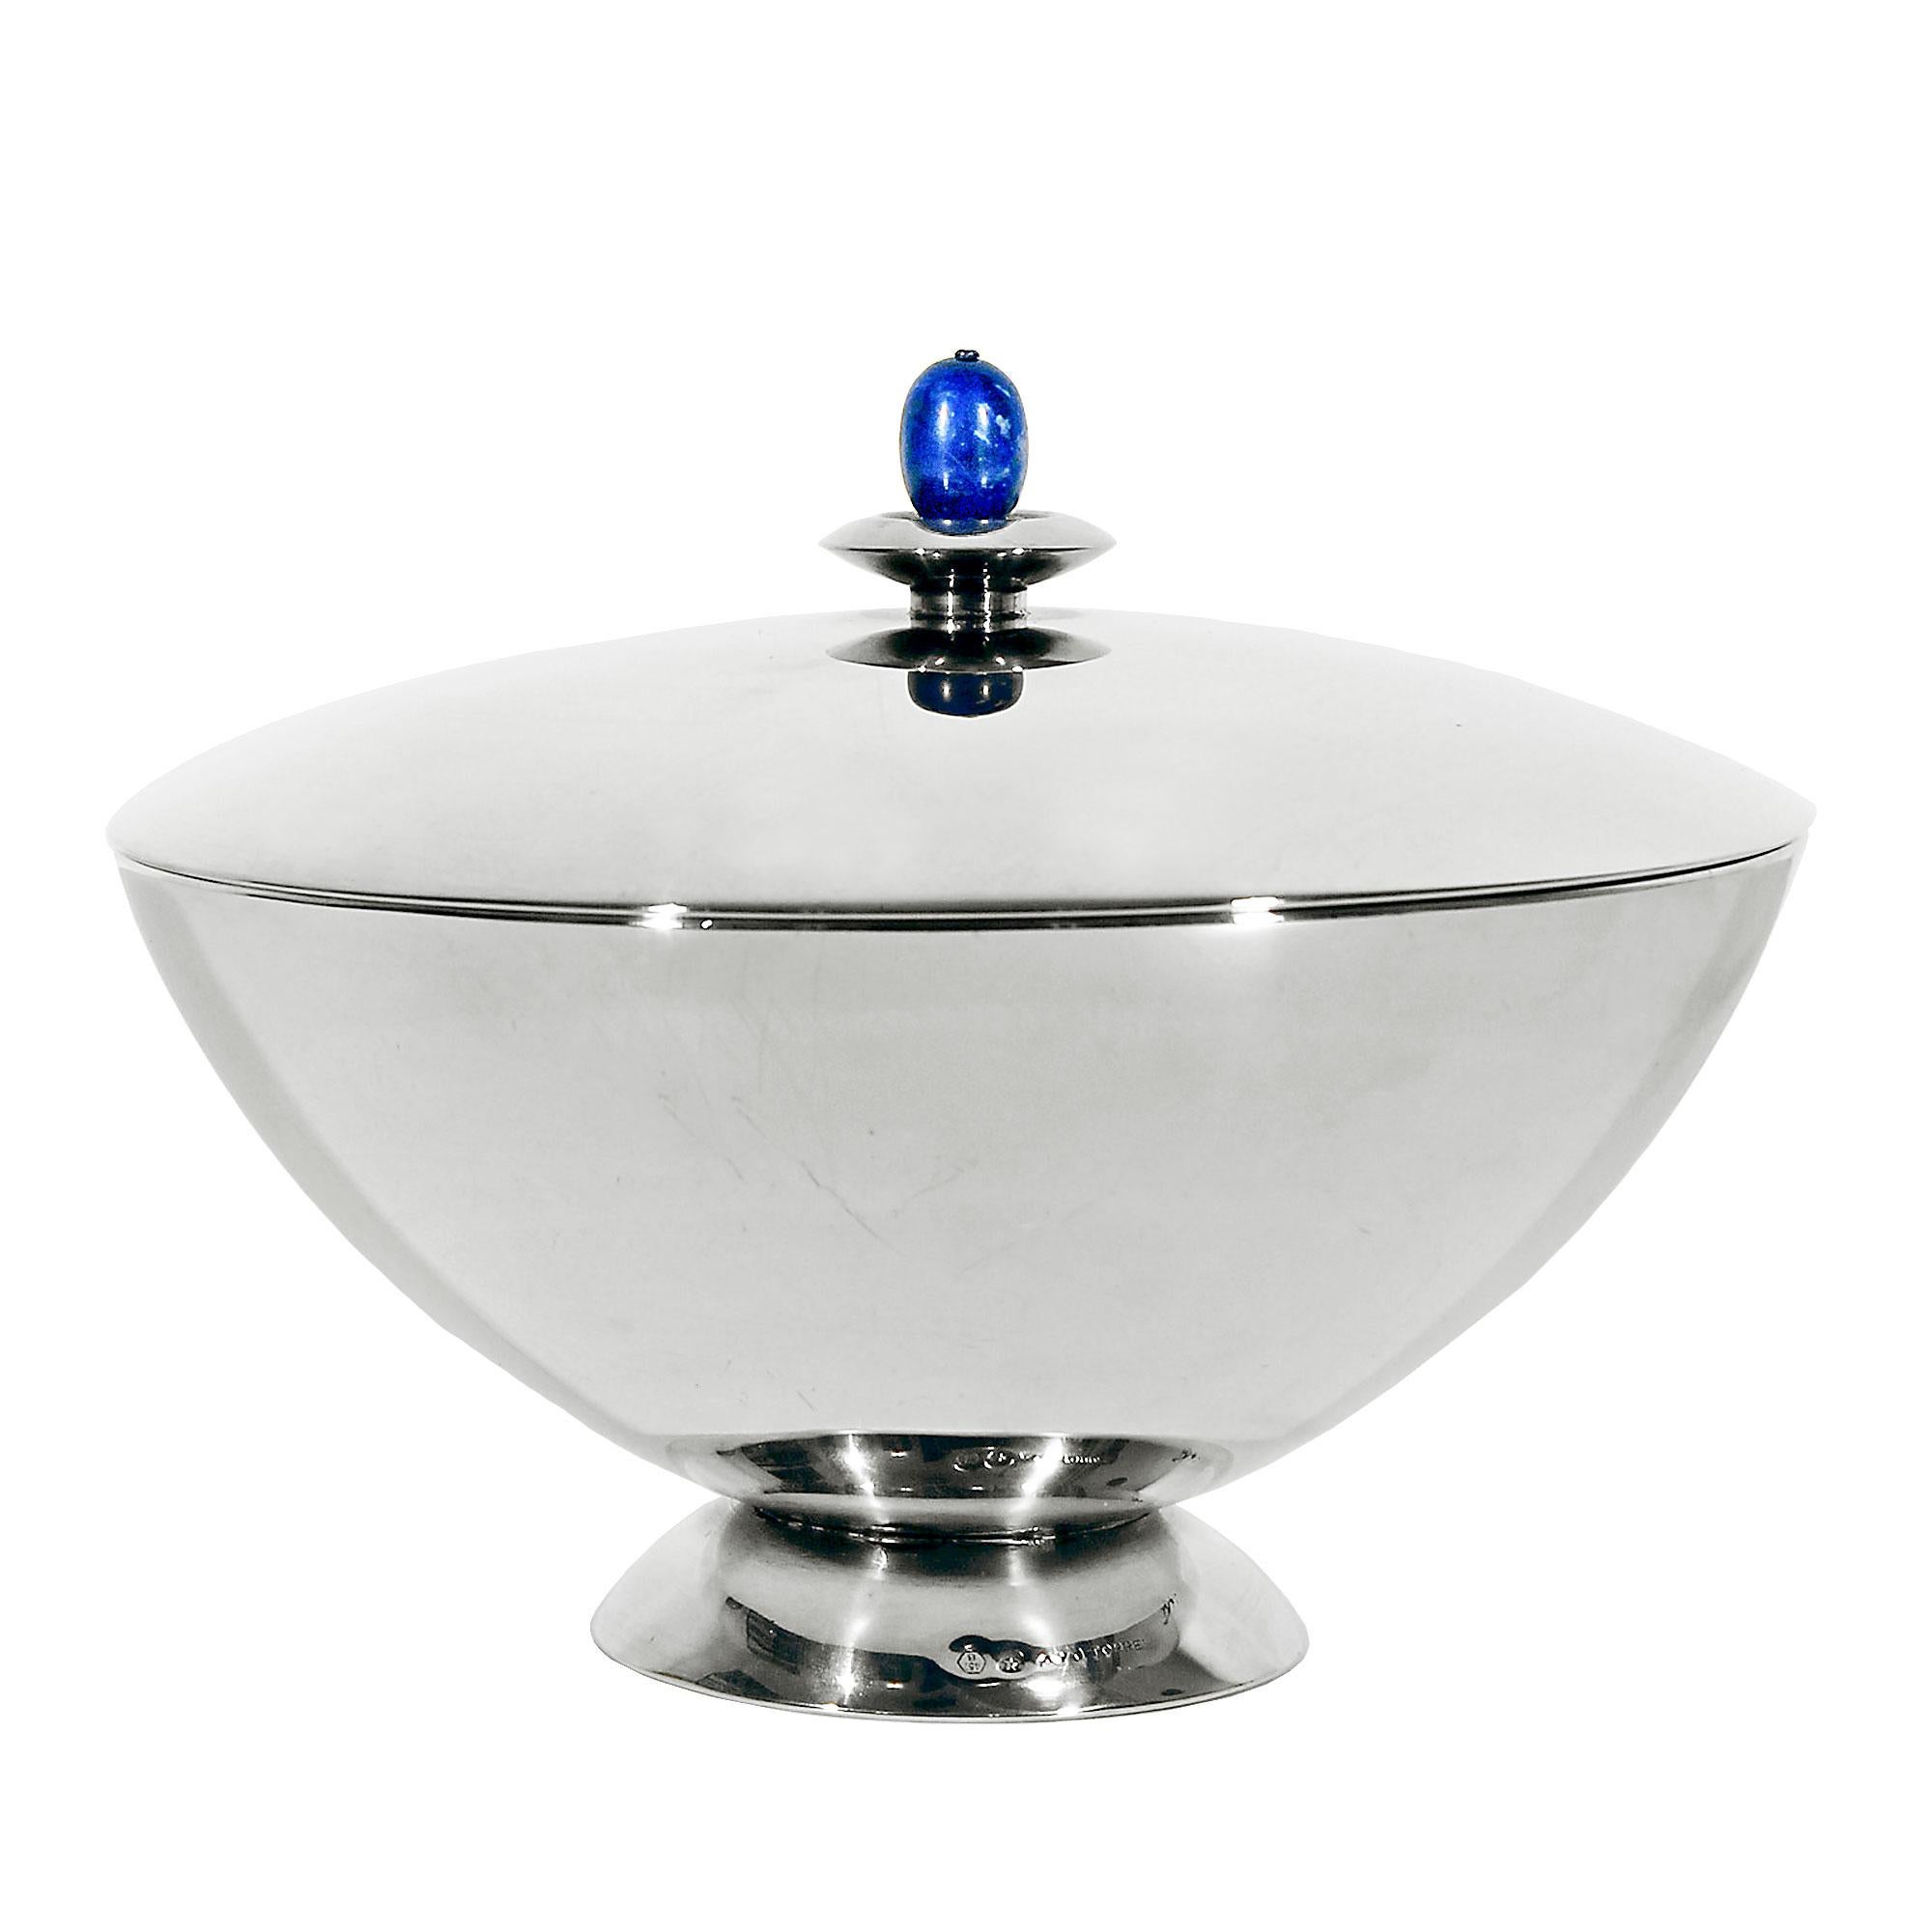 Sterling silver sweet box, lapis lazuli cabochon. Design: A. y J. Torres, Barcelona. Weight: 450 grs. Stamps: 45B - Star - A. y J. Torres. 
Star stamp in Spain is for sterling silver since 1934.
Spain circa 1950.